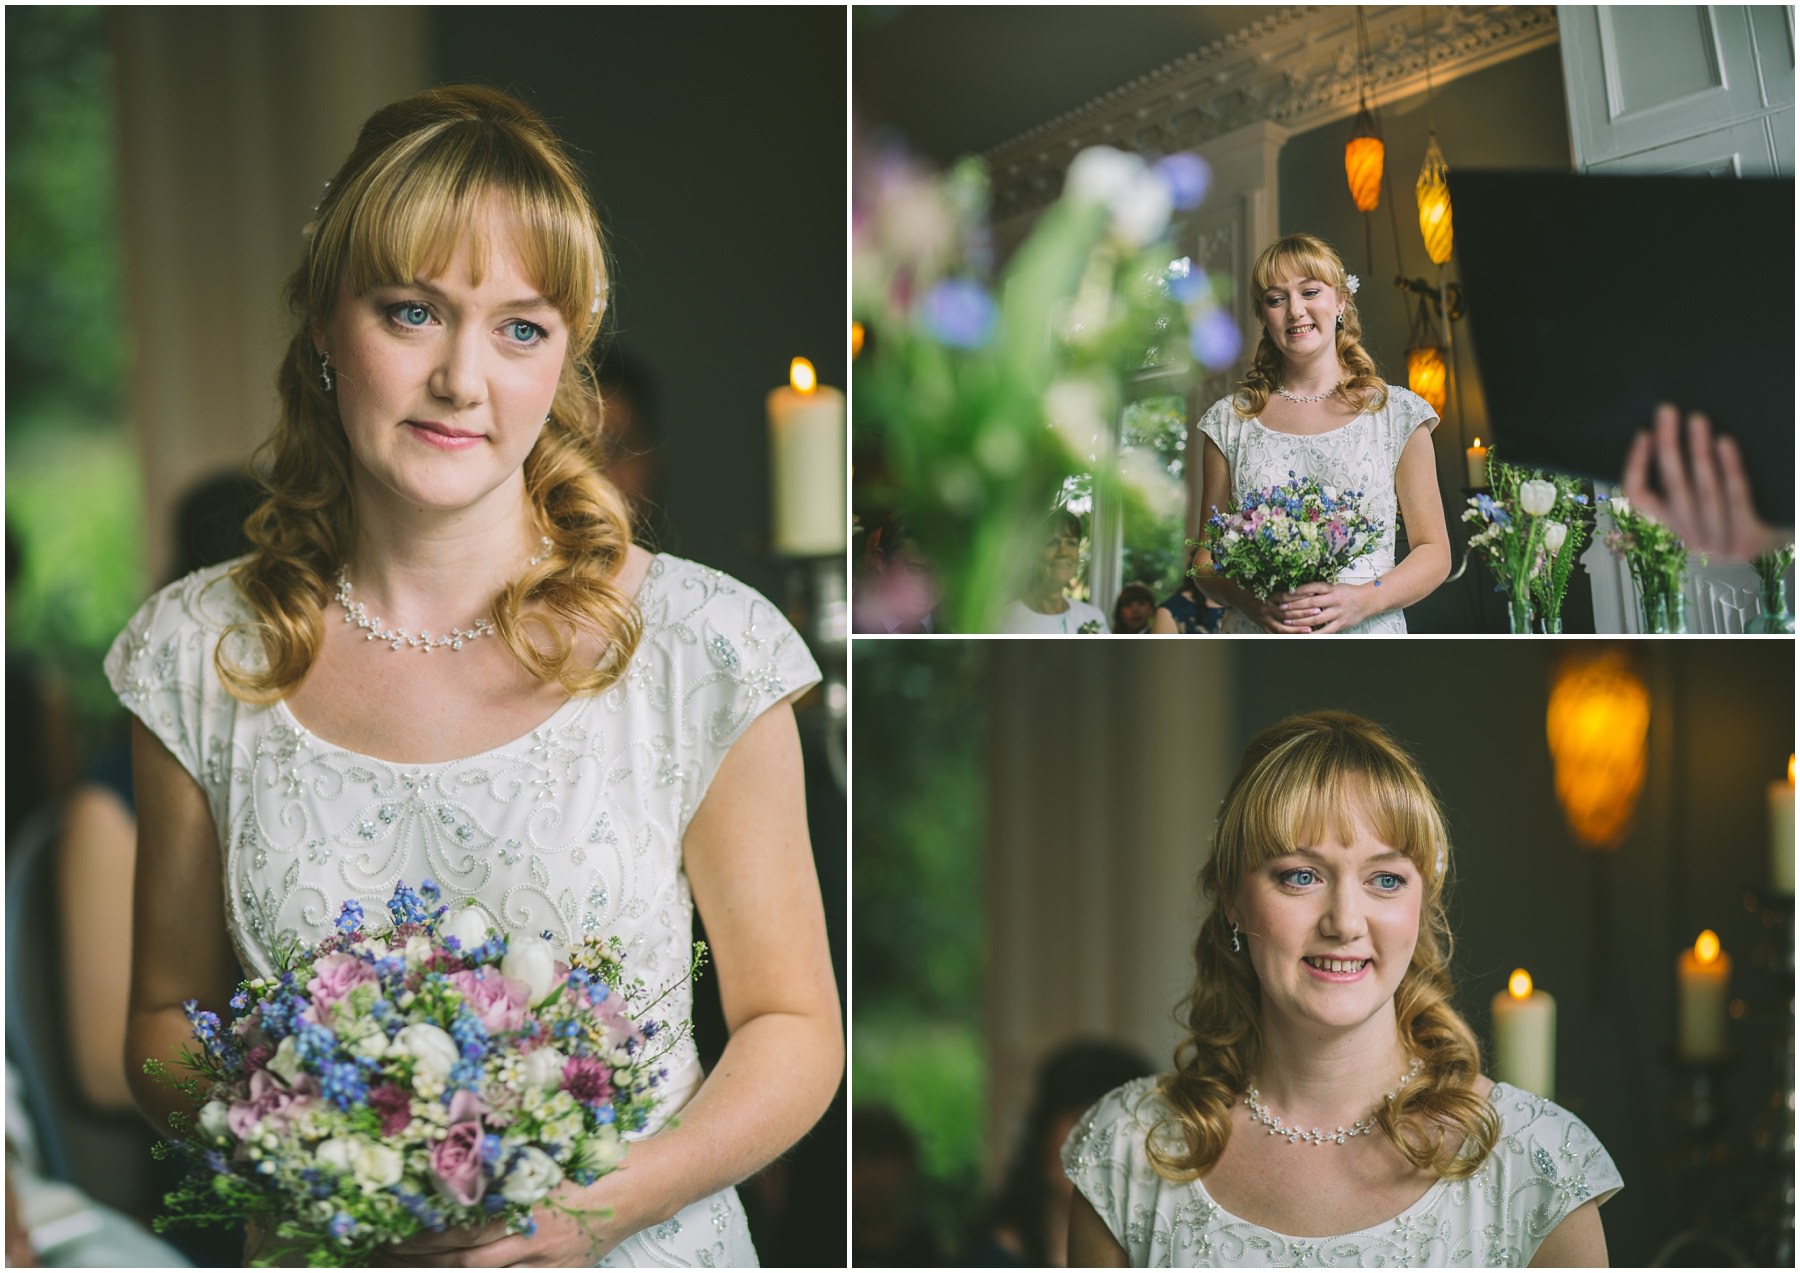 Bride during the wedding ceremony at Didsbury House